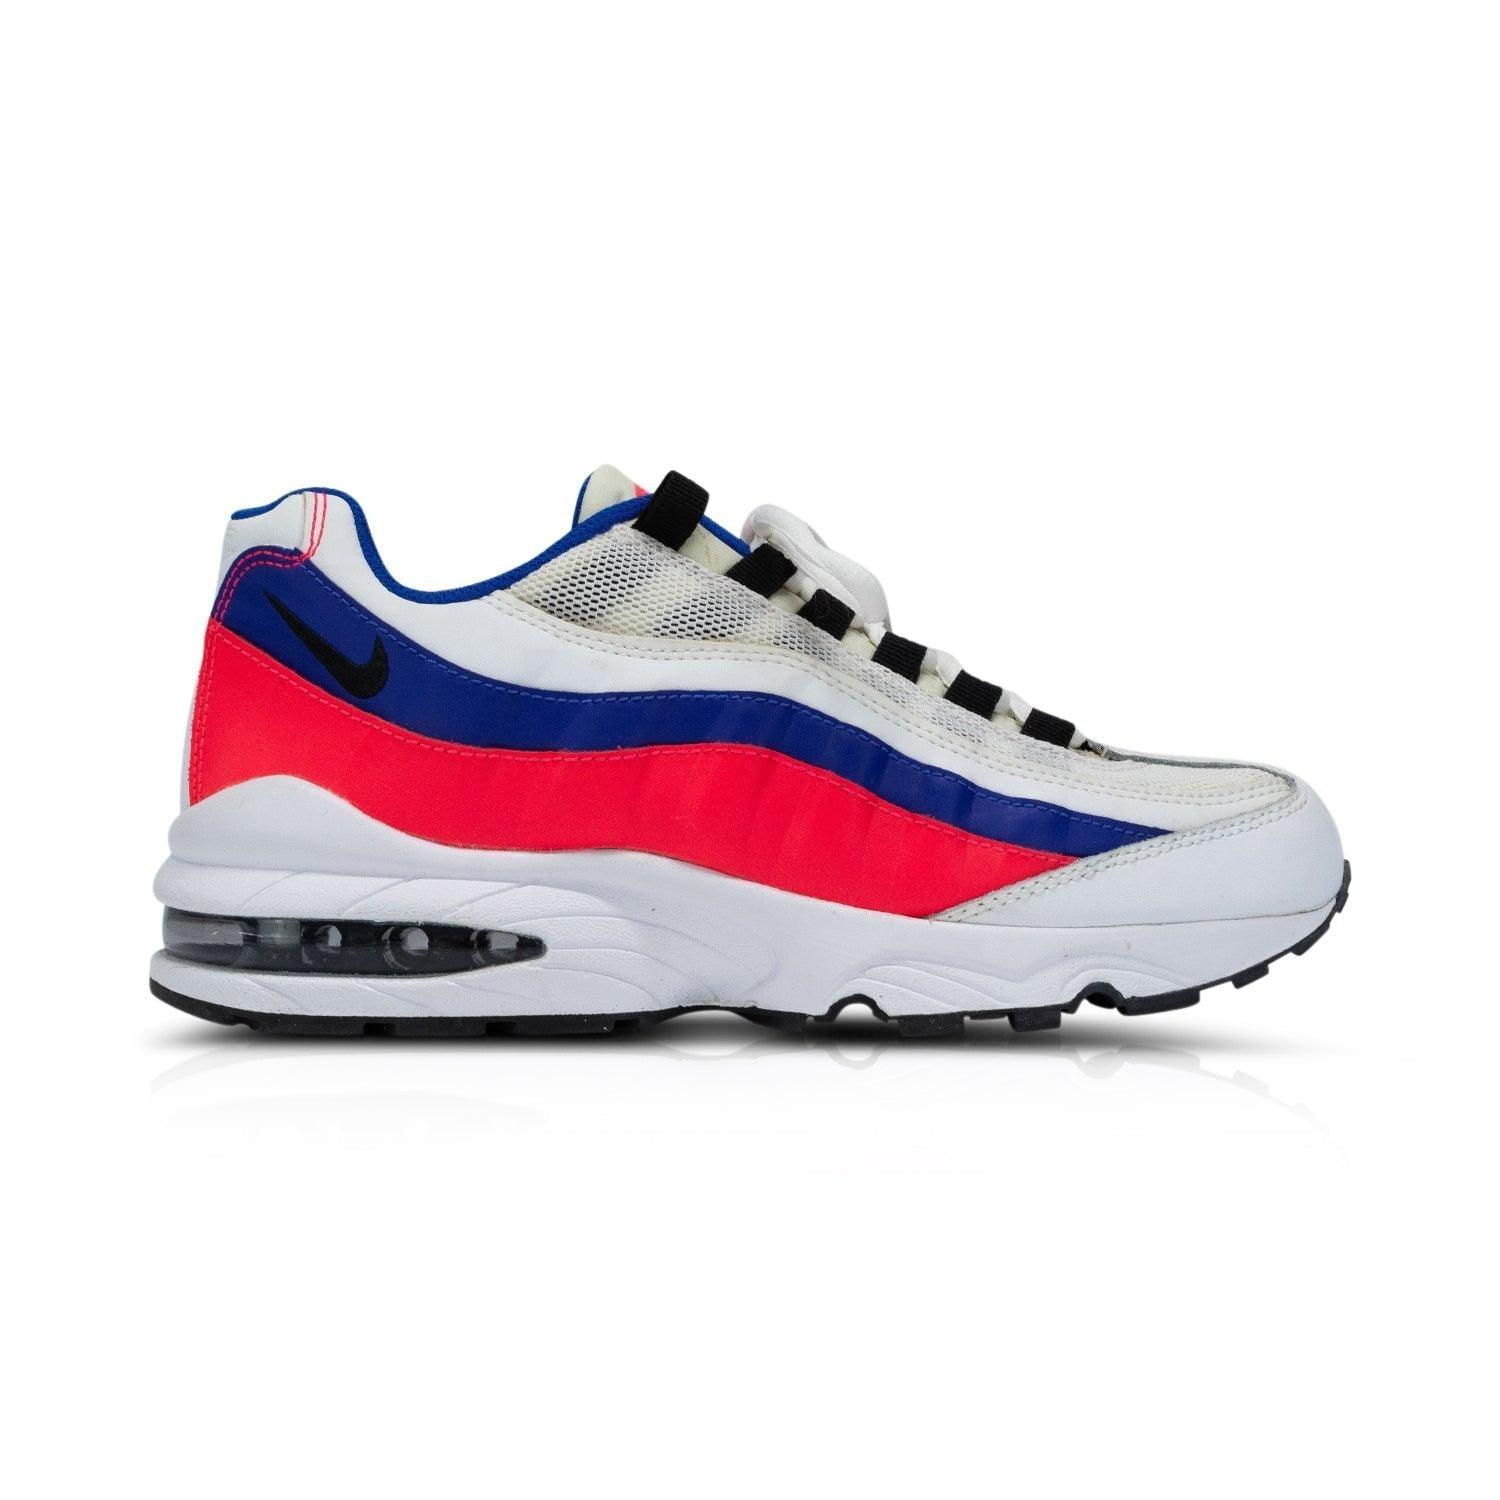 Nike AirMax Sneakers - 5.5 - Fashionably Yours